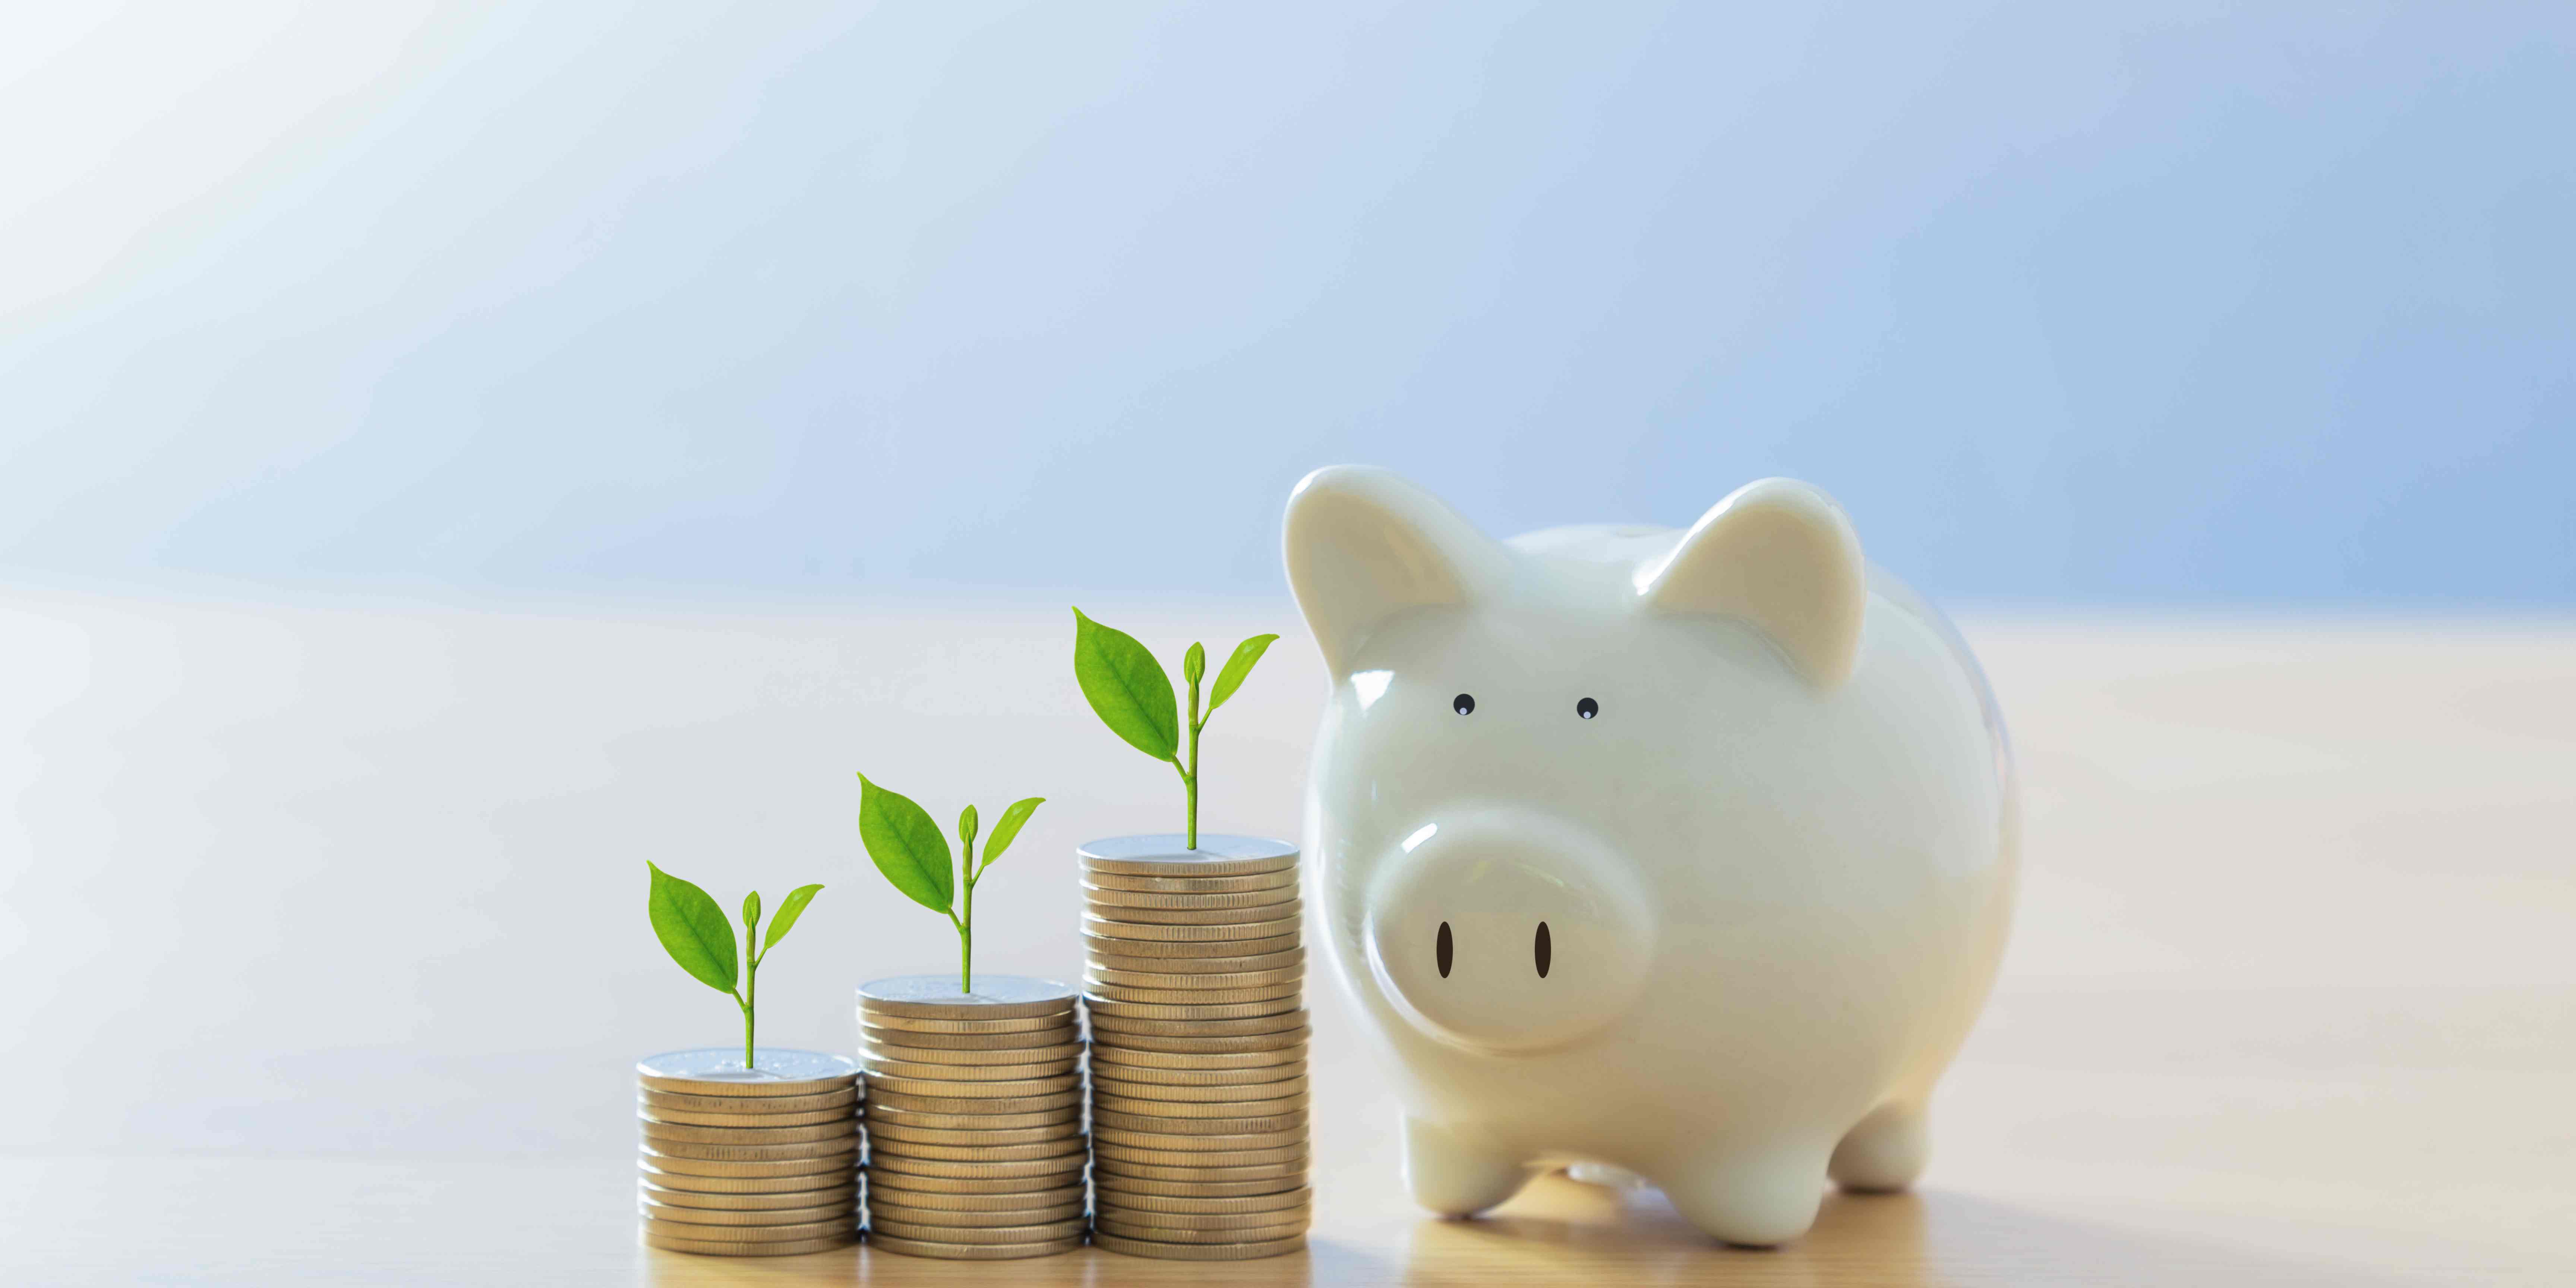 Is a Certificate of Deposit Better Than a Savings Account?